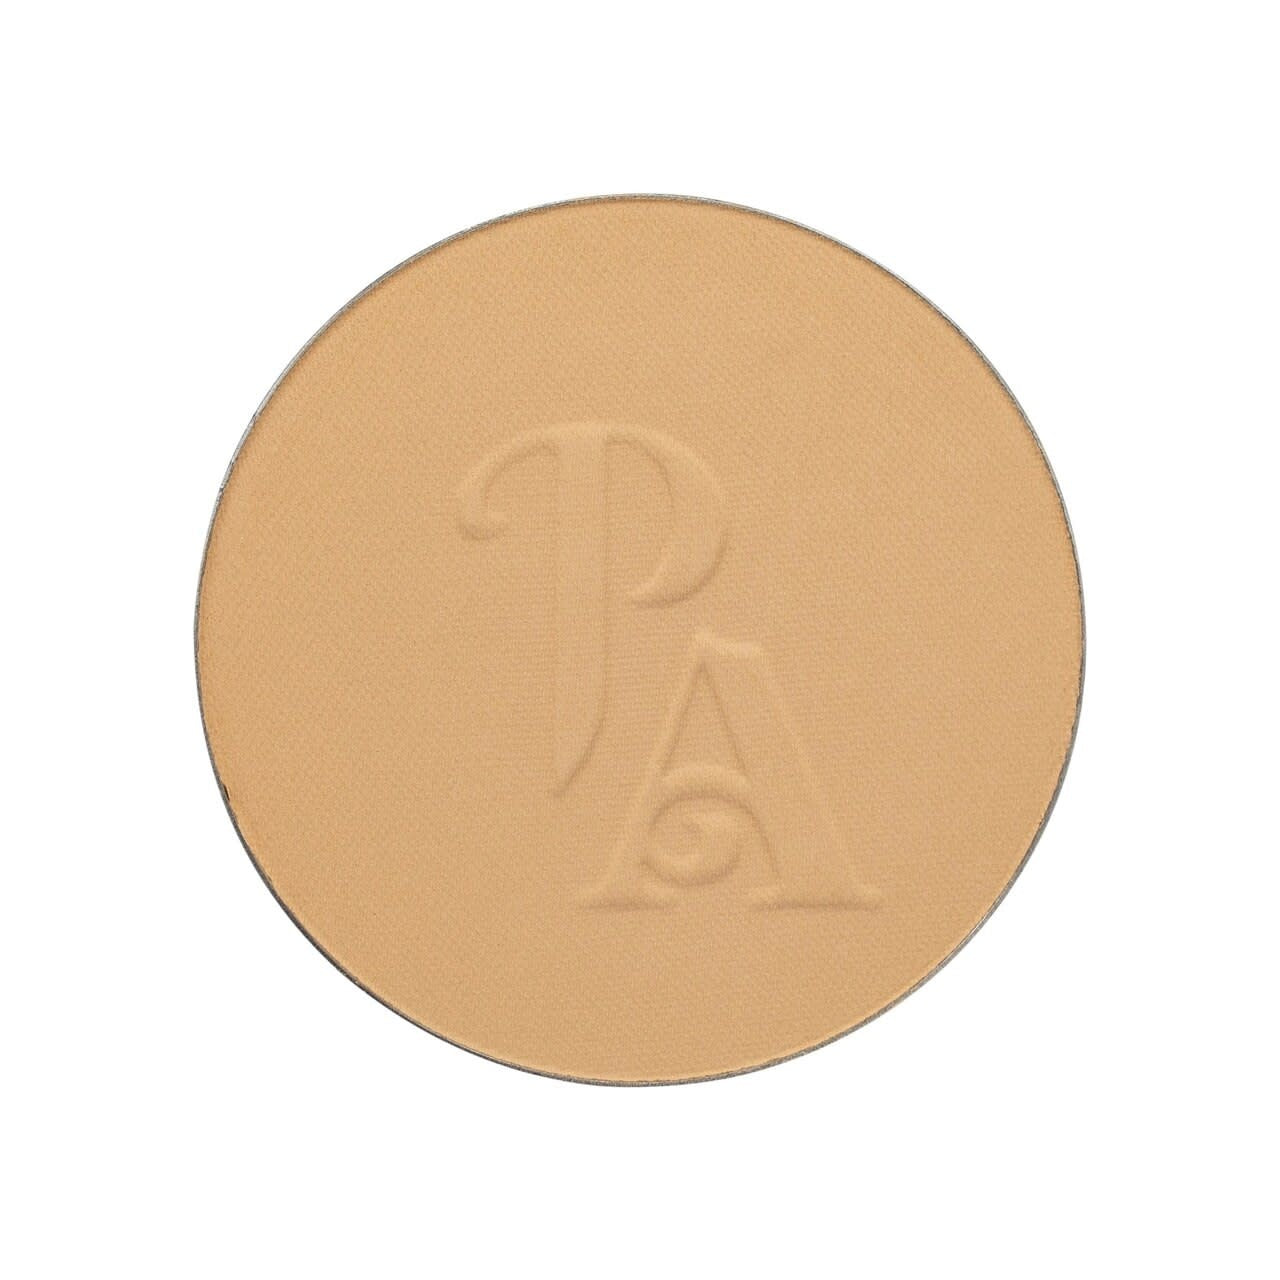 Pure Anada Sheer Matte Pressed Mineral Very Fair Foundation Compact 16g